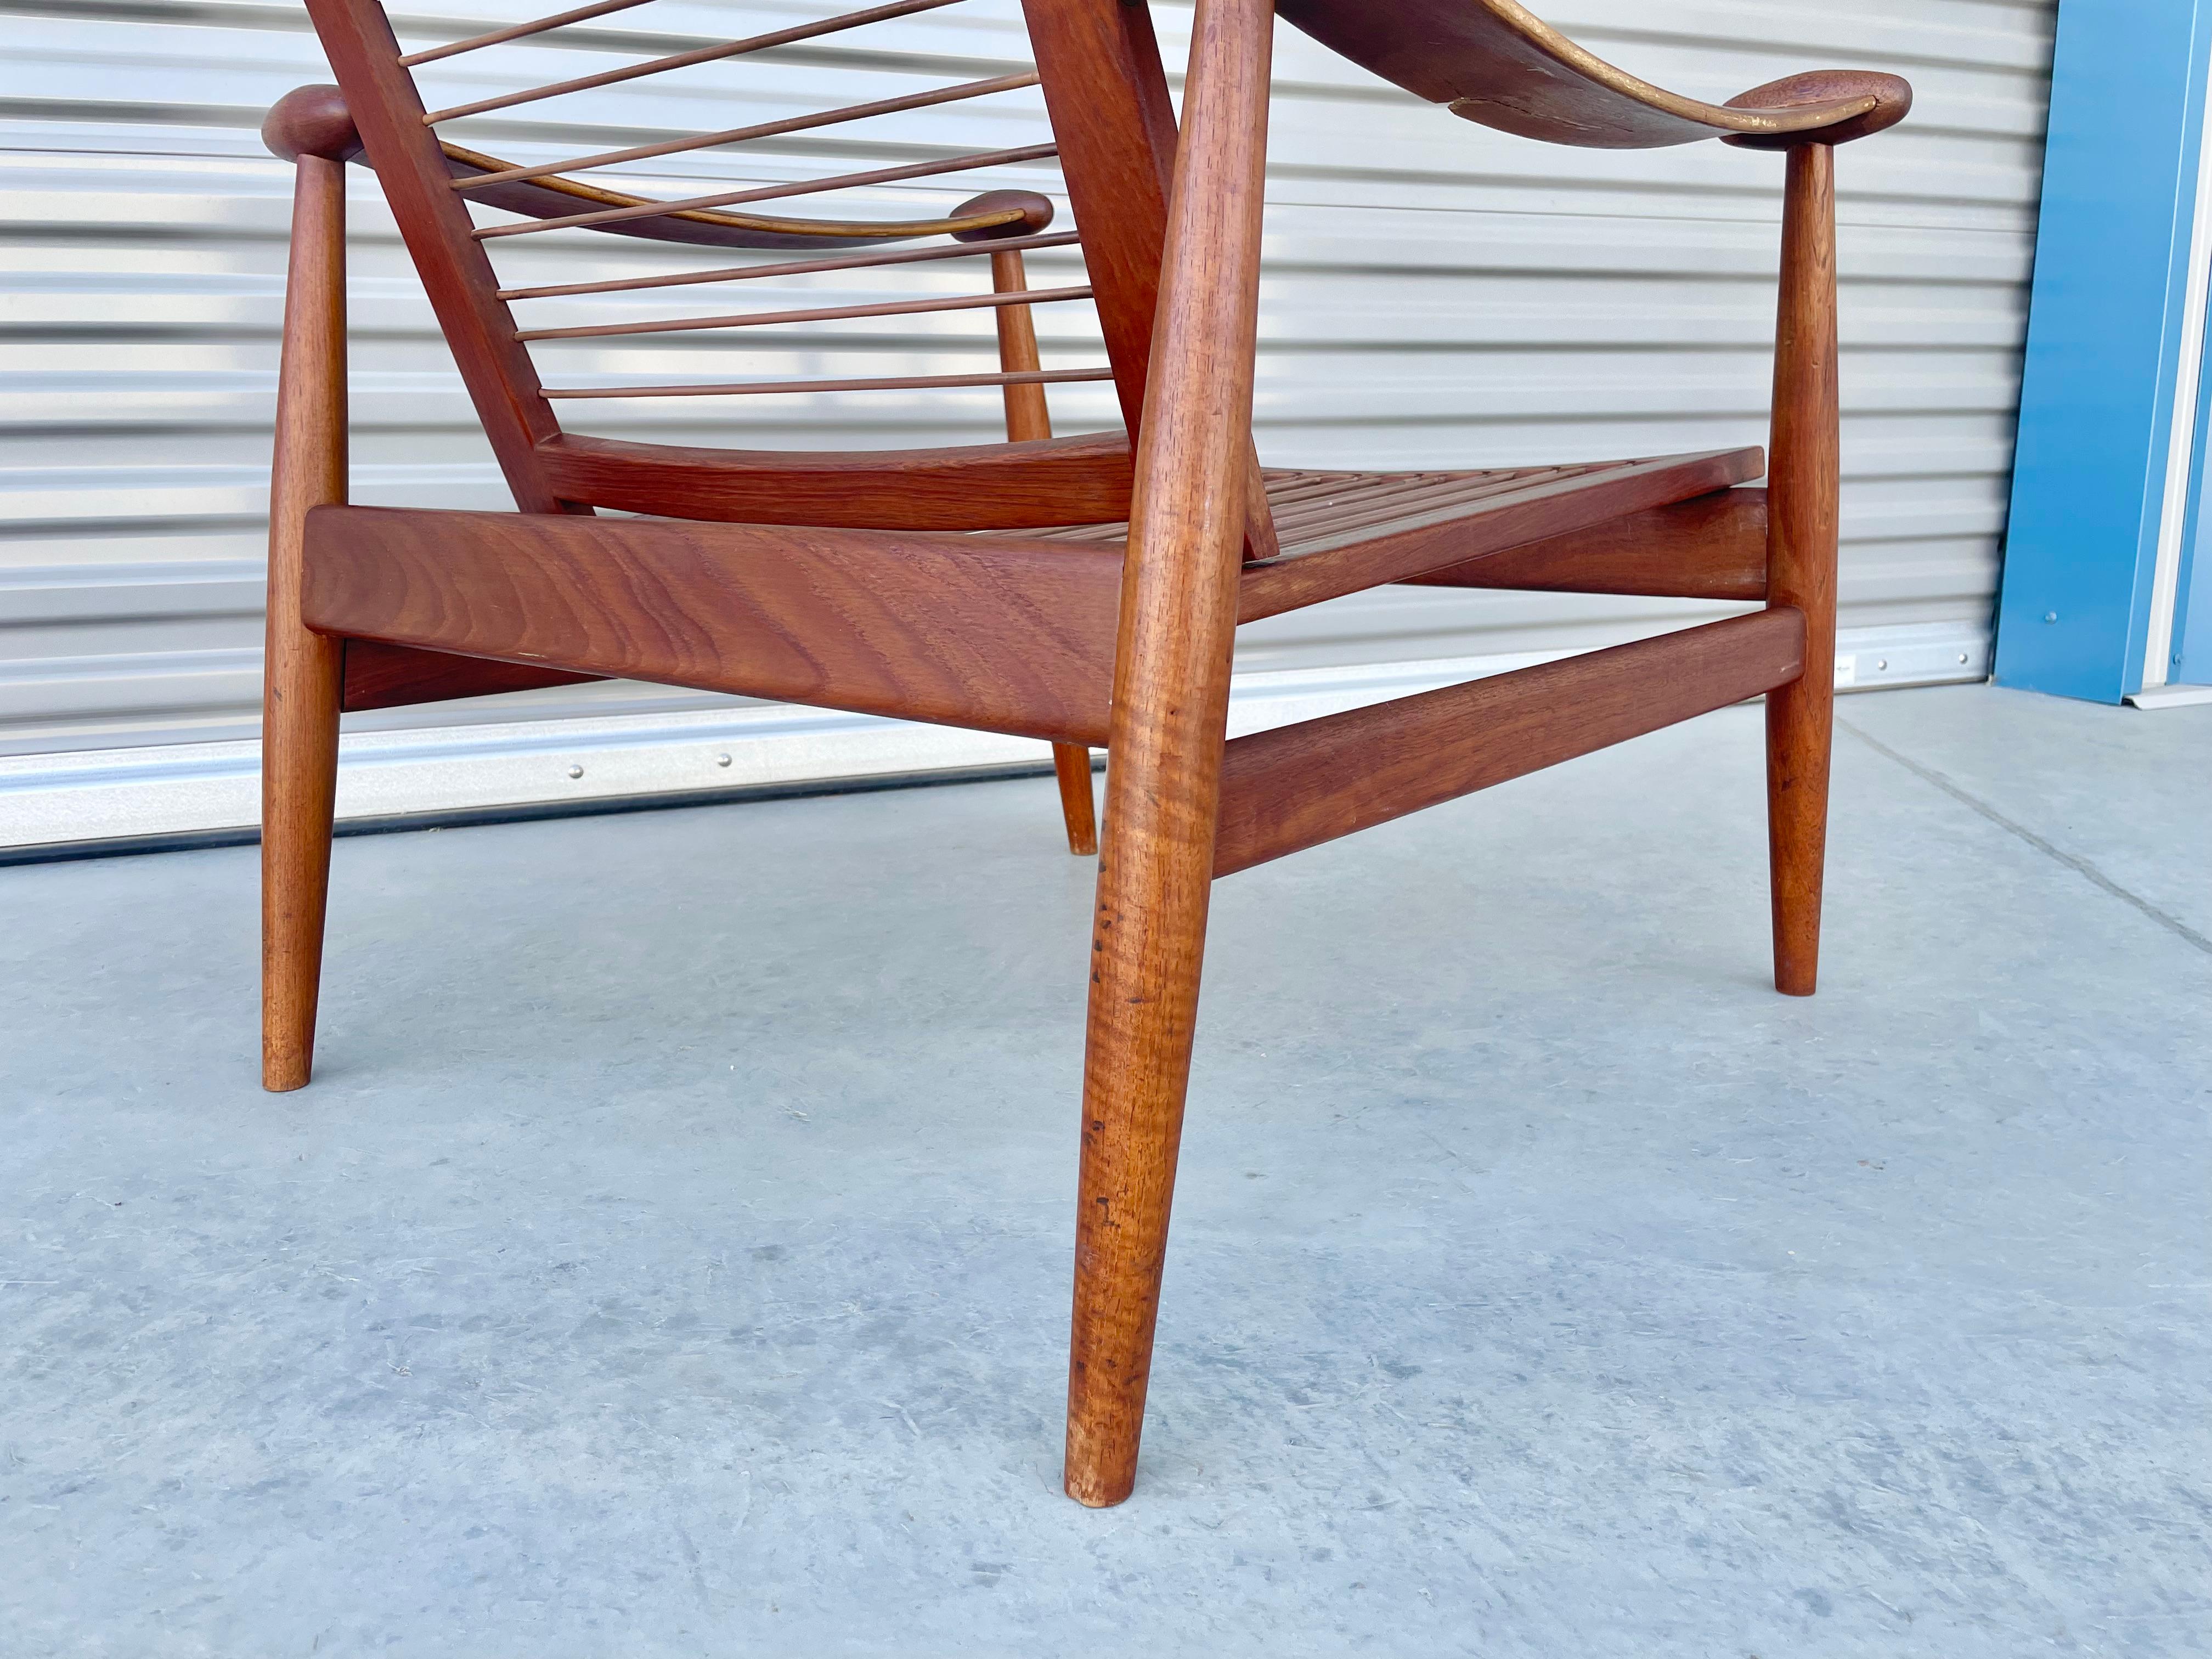 Danish Modern Teak Spade Lounge Chair by Finn Juhl for France & Søn In Good Condition For Sale In North Hollywood, CA